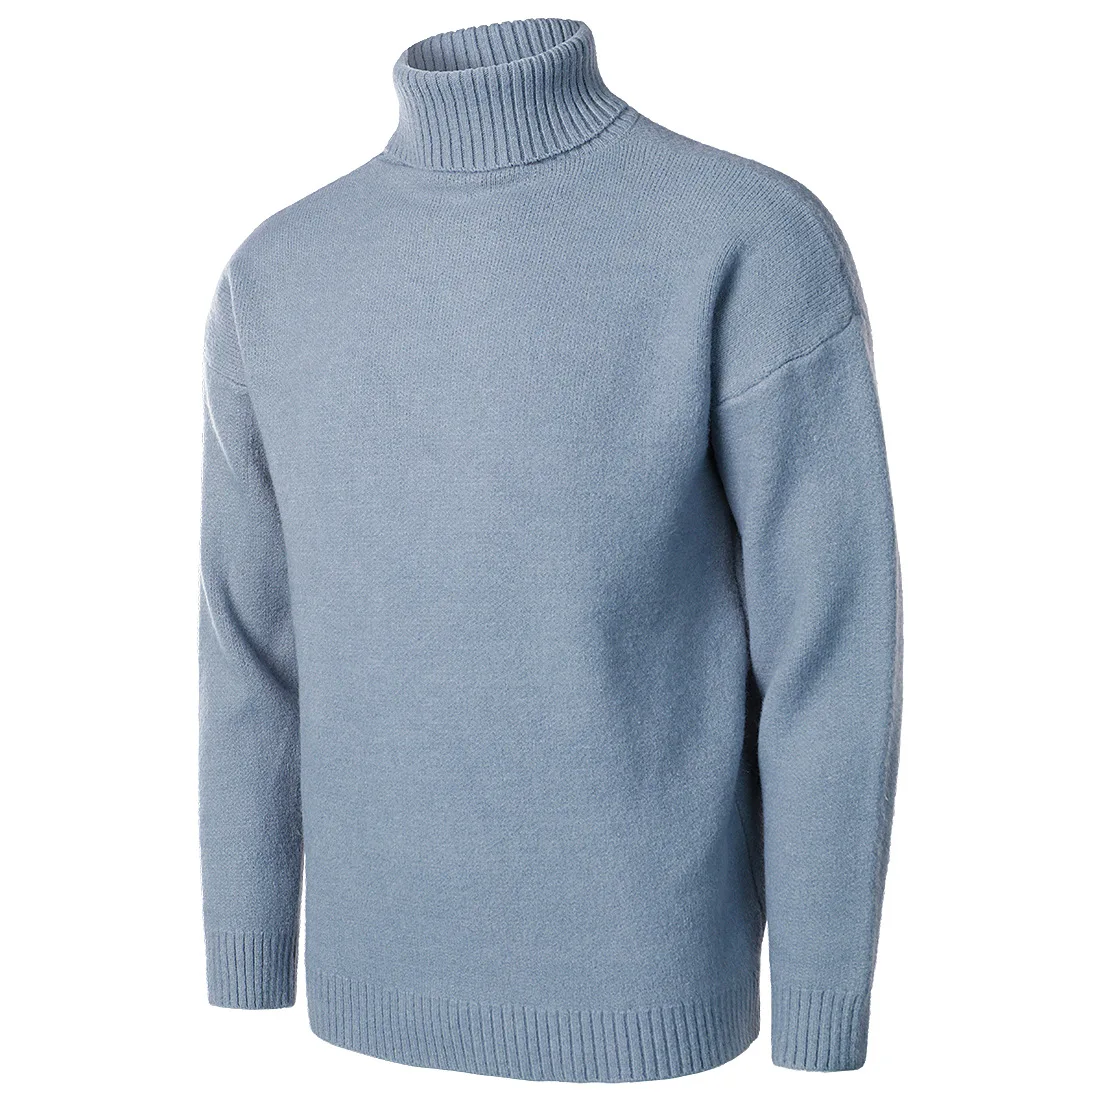 Men's Turtleneck Sweaters Thick Winter Warm High Neck Sweater Mens Sweaters Solid Color Slims Pullover Men Knitwear Male Sweater